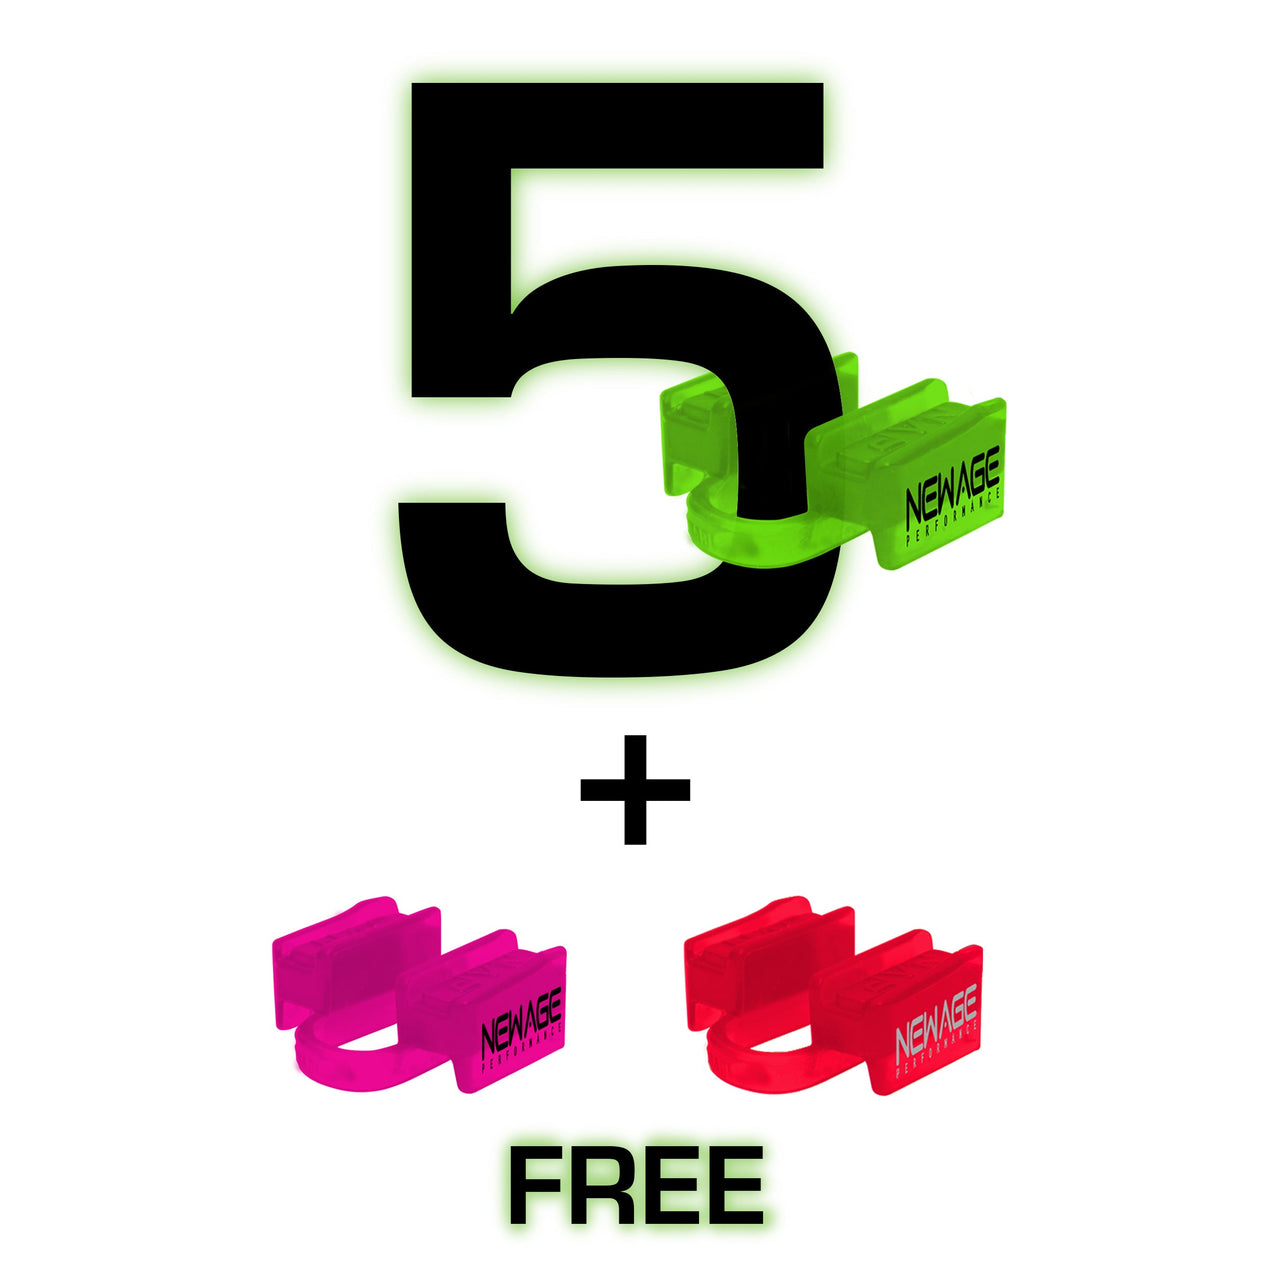 Special offer: Buy 5, Get 2 Free on mouthpieces or products.